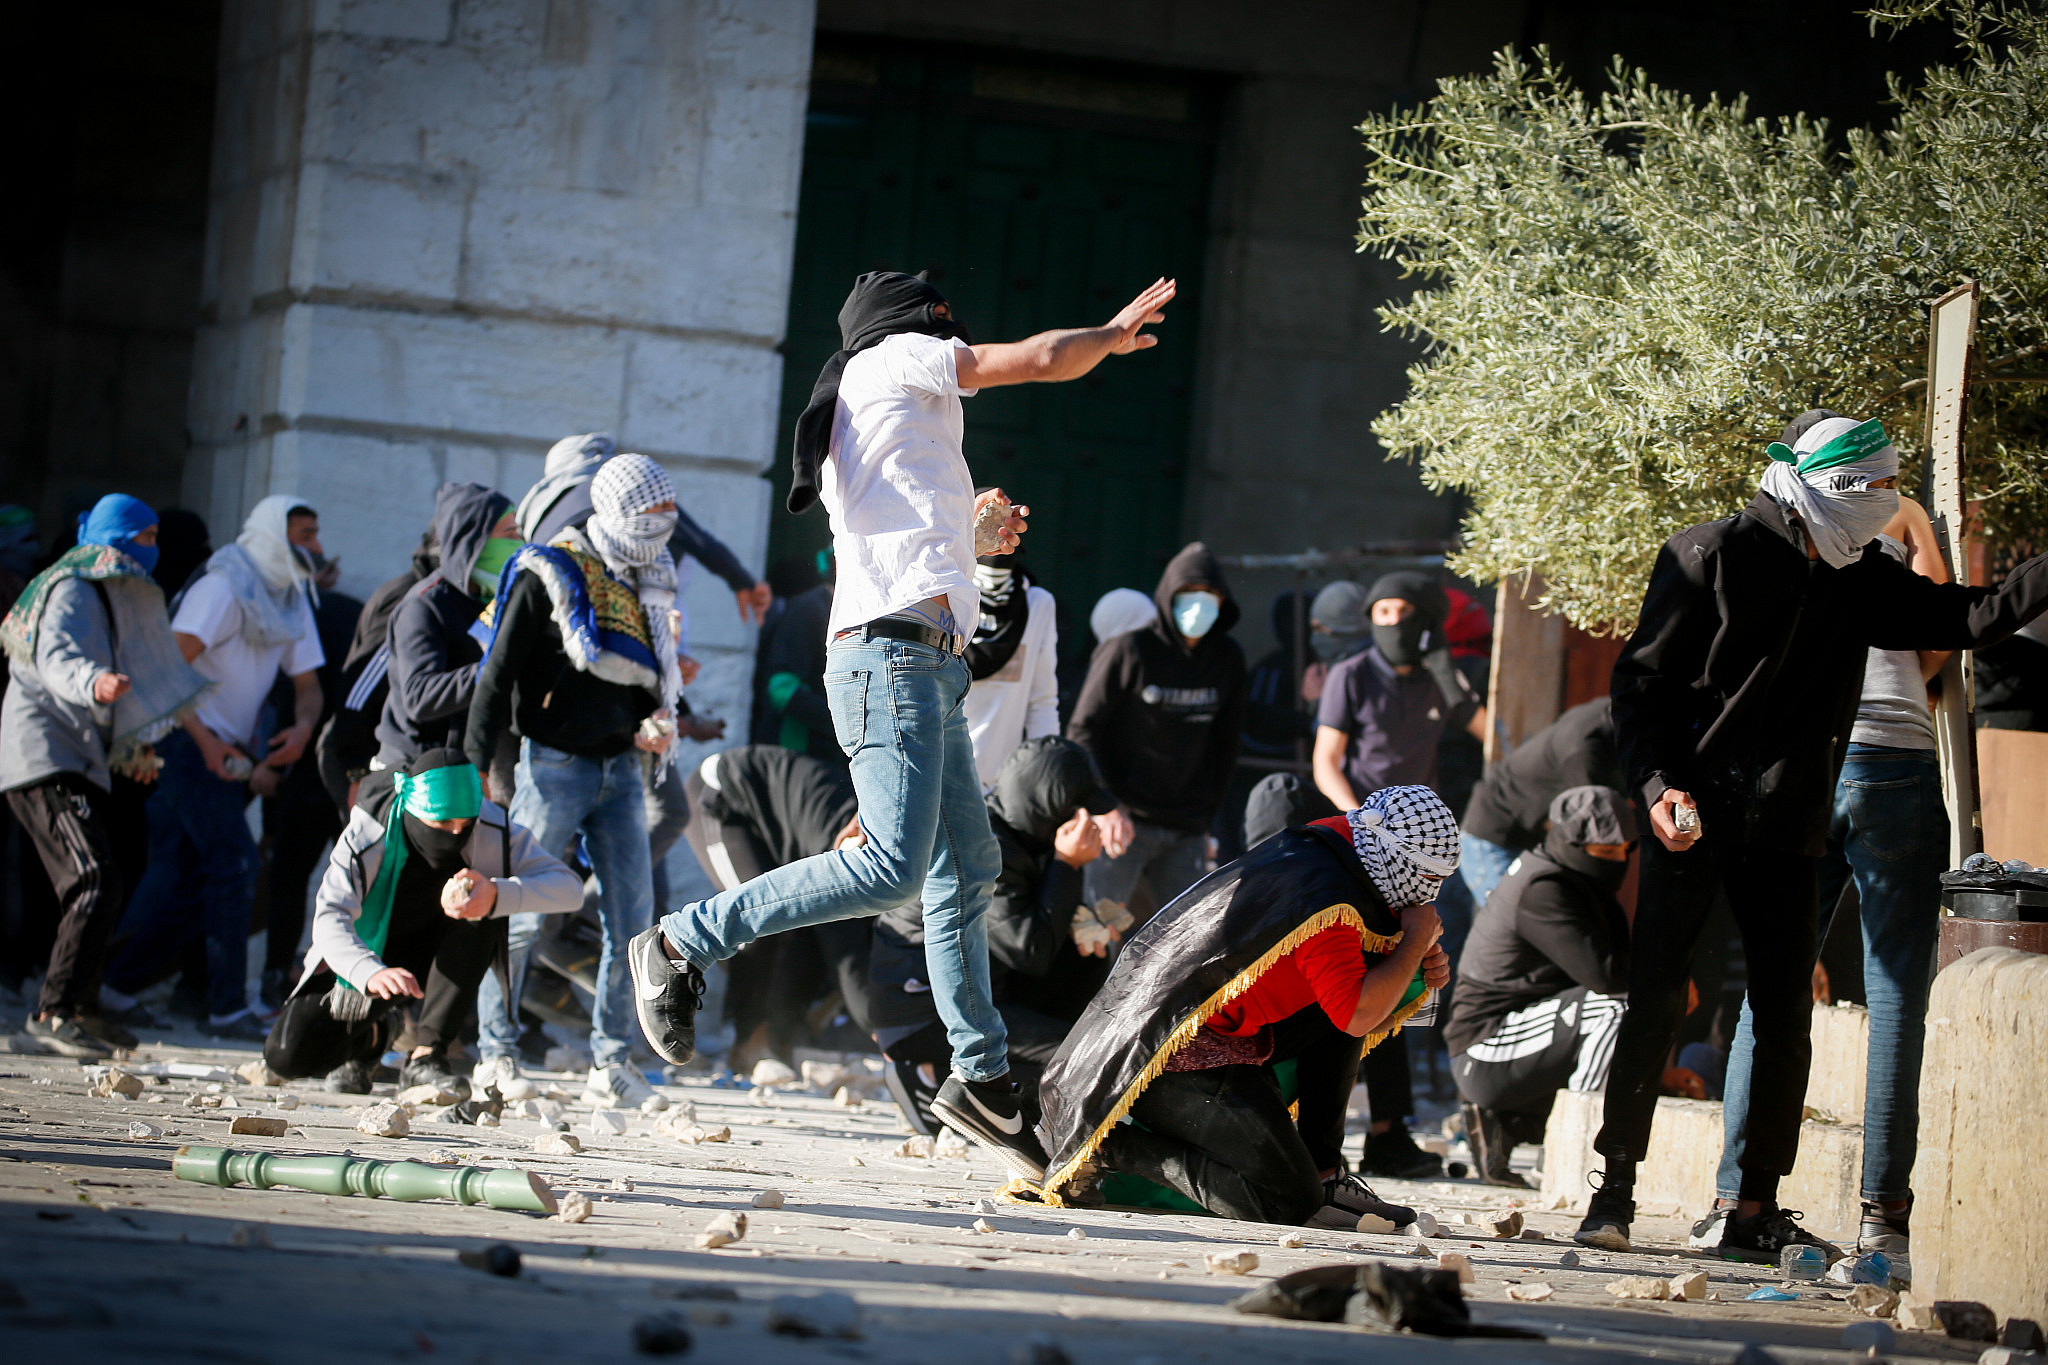 Palestinian protesters hurl stones toward Israeli security forces during clashes on the holy month of Ramadan at Al-Aqsa Mosque compound in Jerusalem's Old City, April 15, 2022. (Jamal Awad/Flash90)